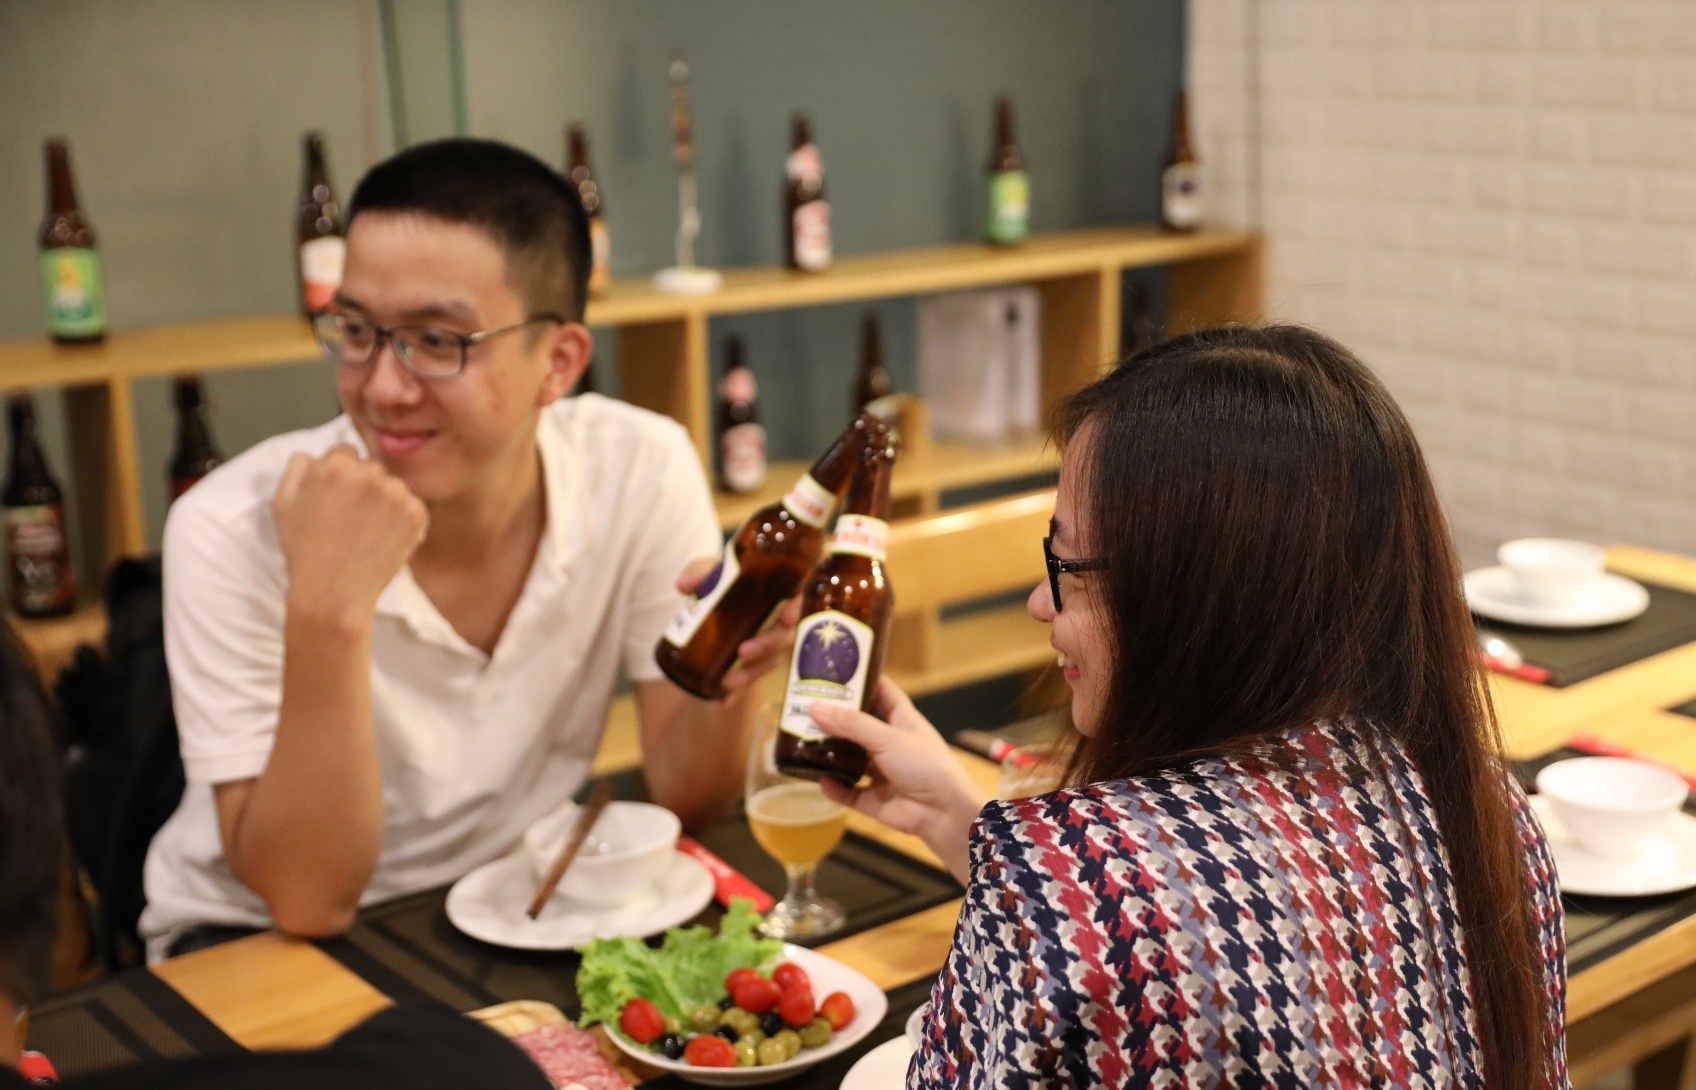 Is non-alcoholic beer now a priority at Tet?